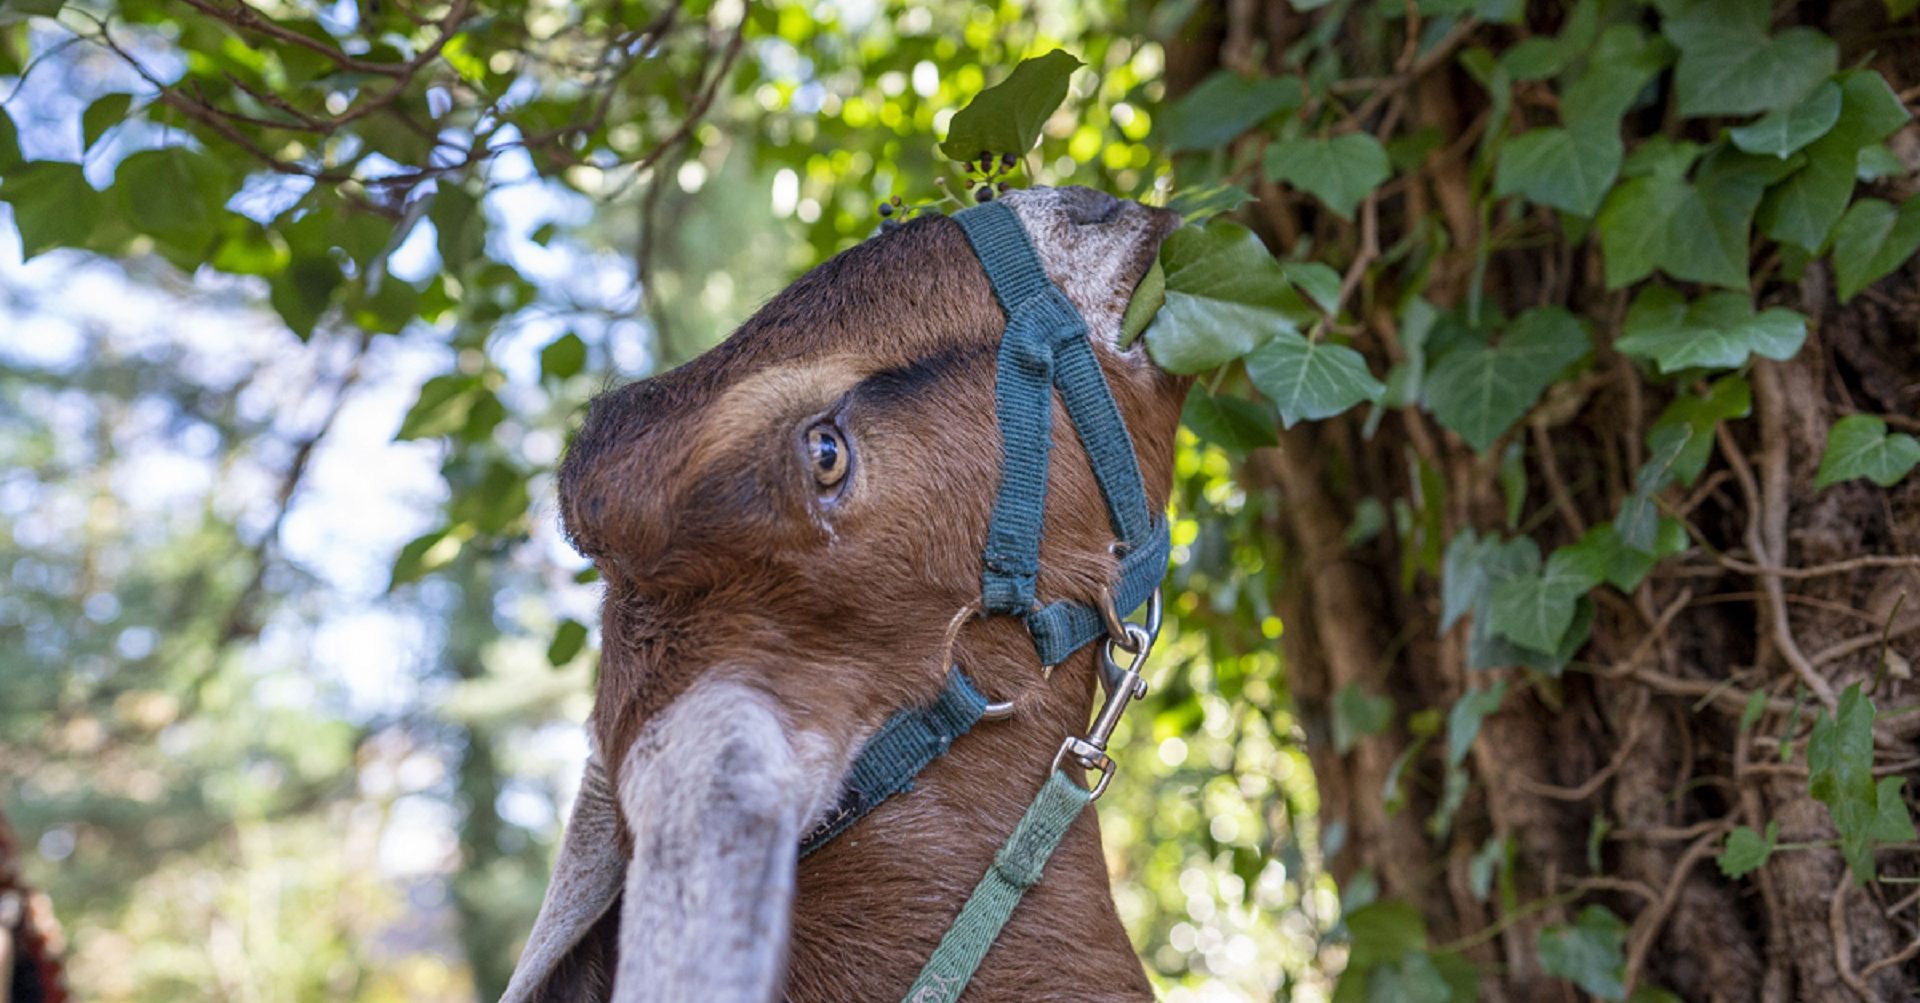 A goat from the Philly Goat Project feasts on the leaves of English ivy clearing the way for landscapers to cut down the invasive plant.